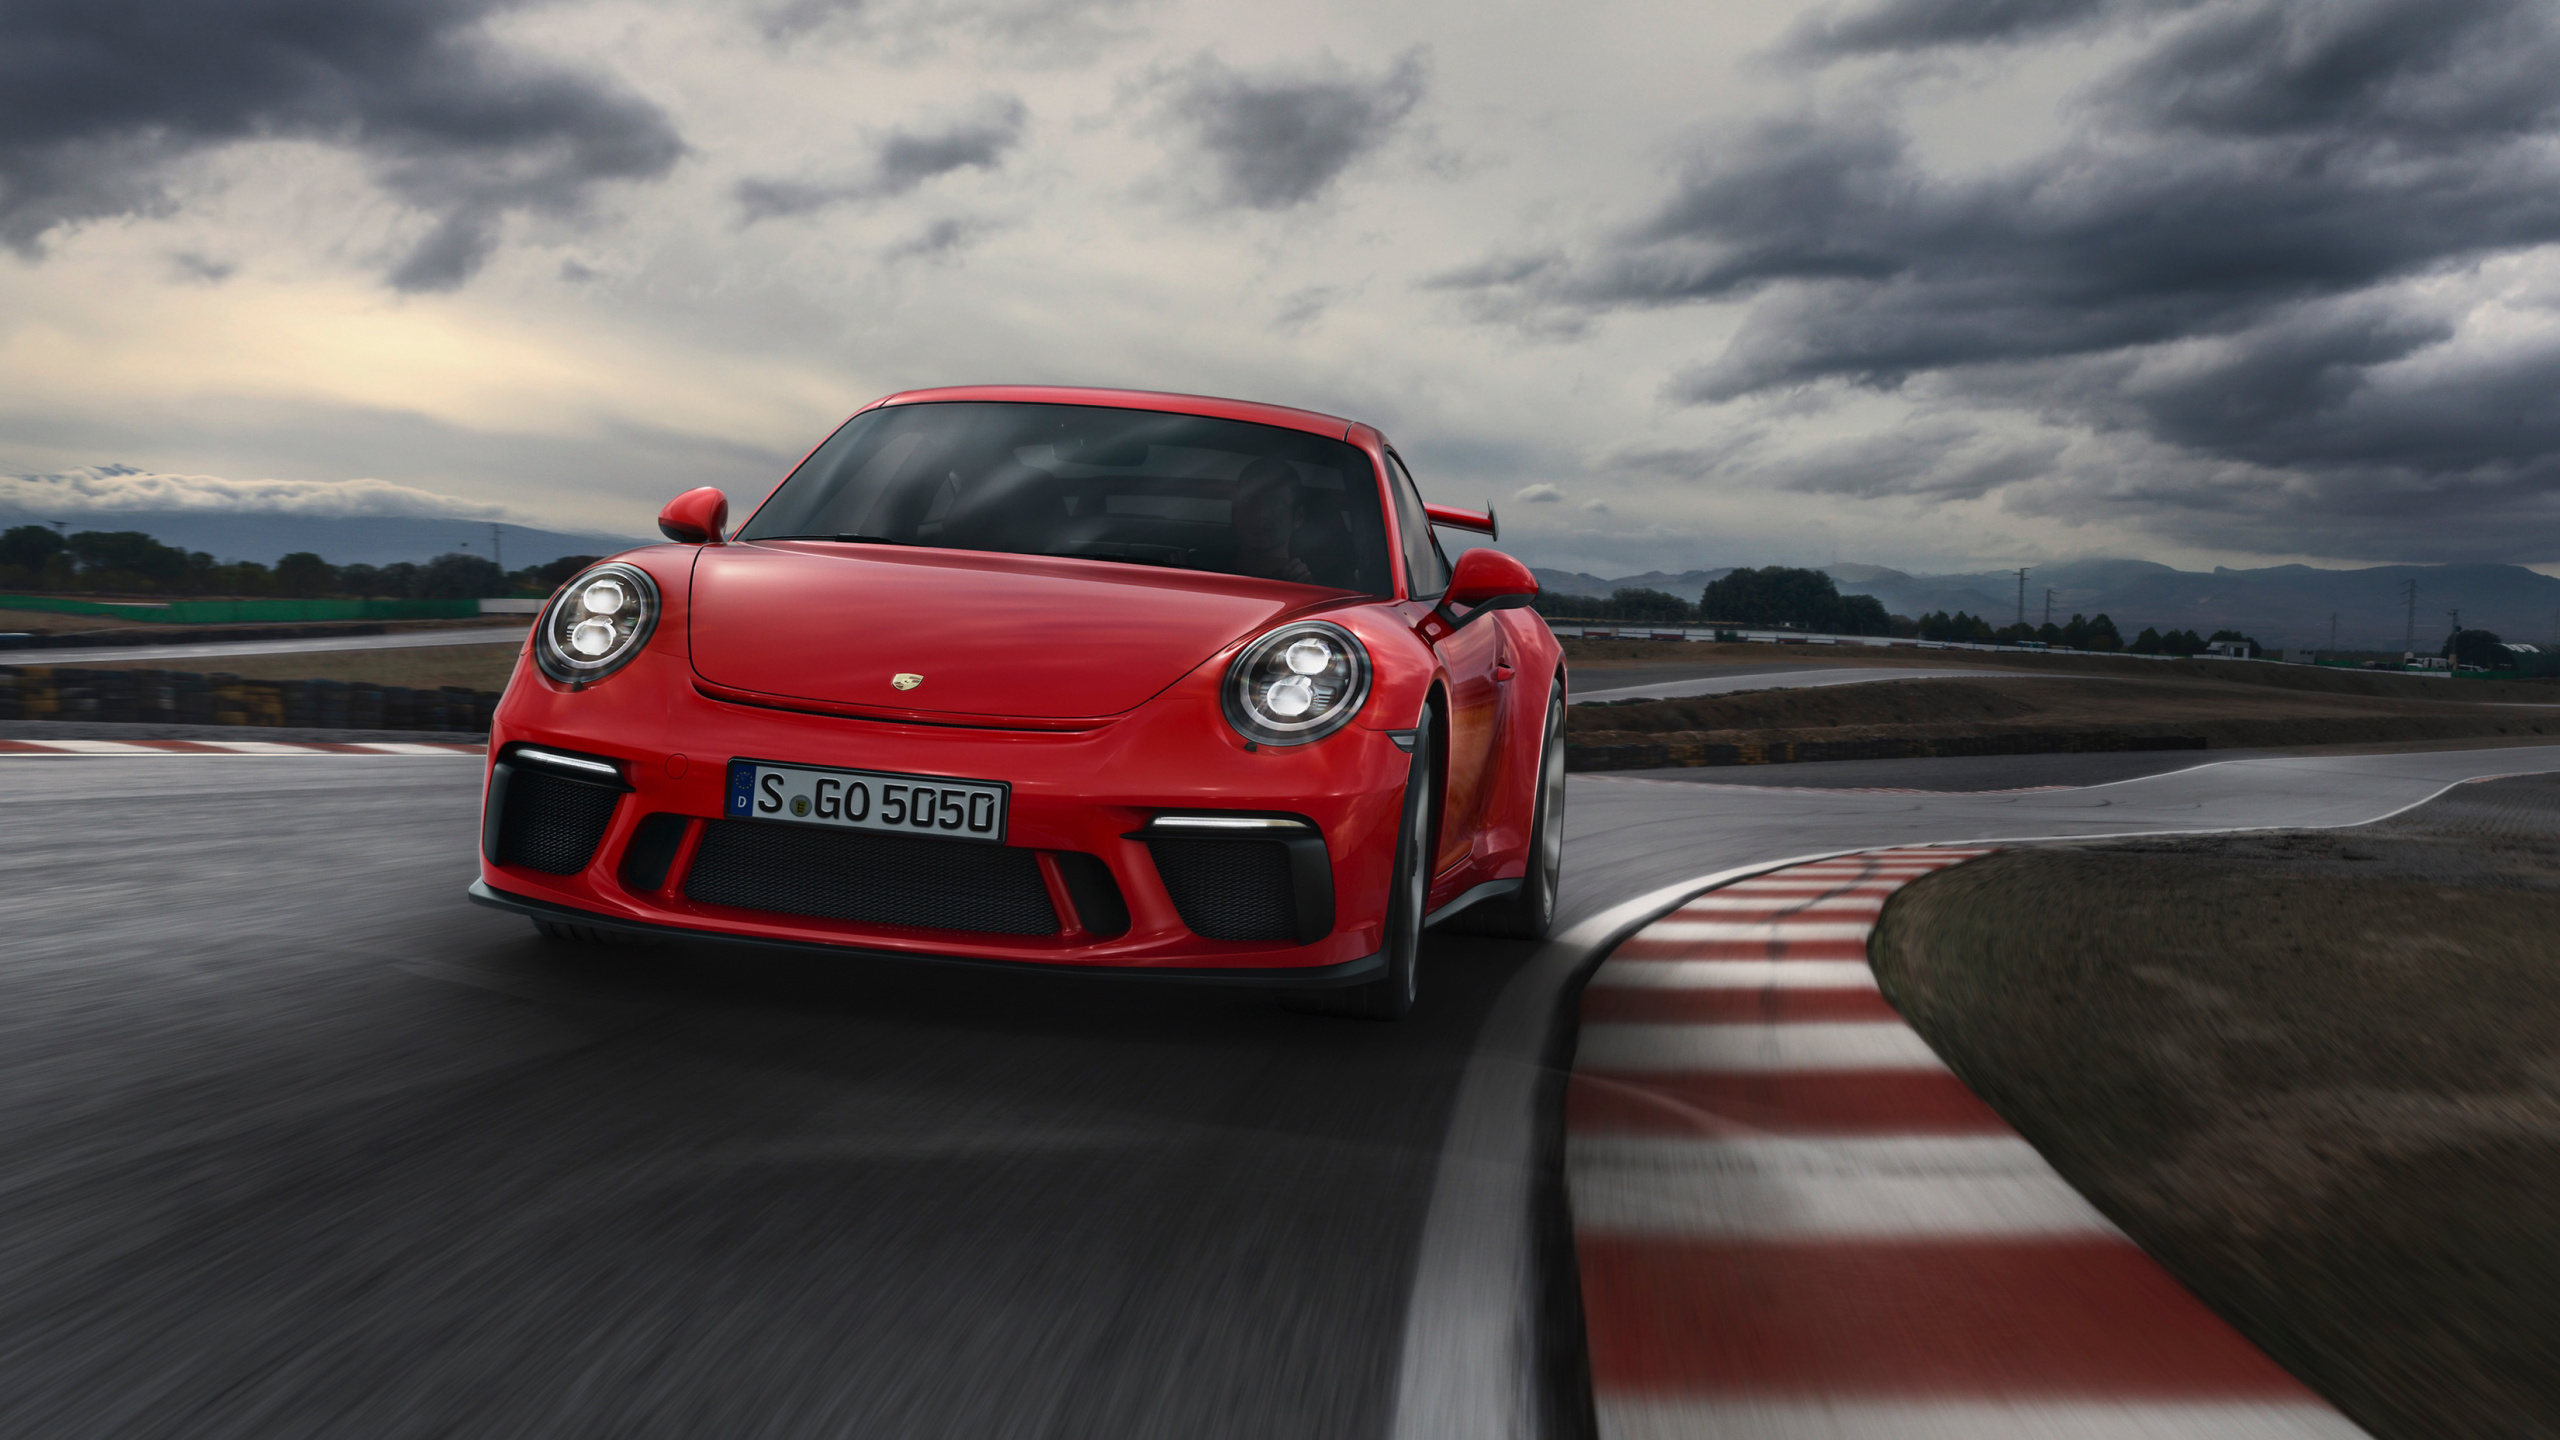 Red Porsche 911 on Road Under Cloudy Sky. Wallpaper in 2560x1440 Resolution